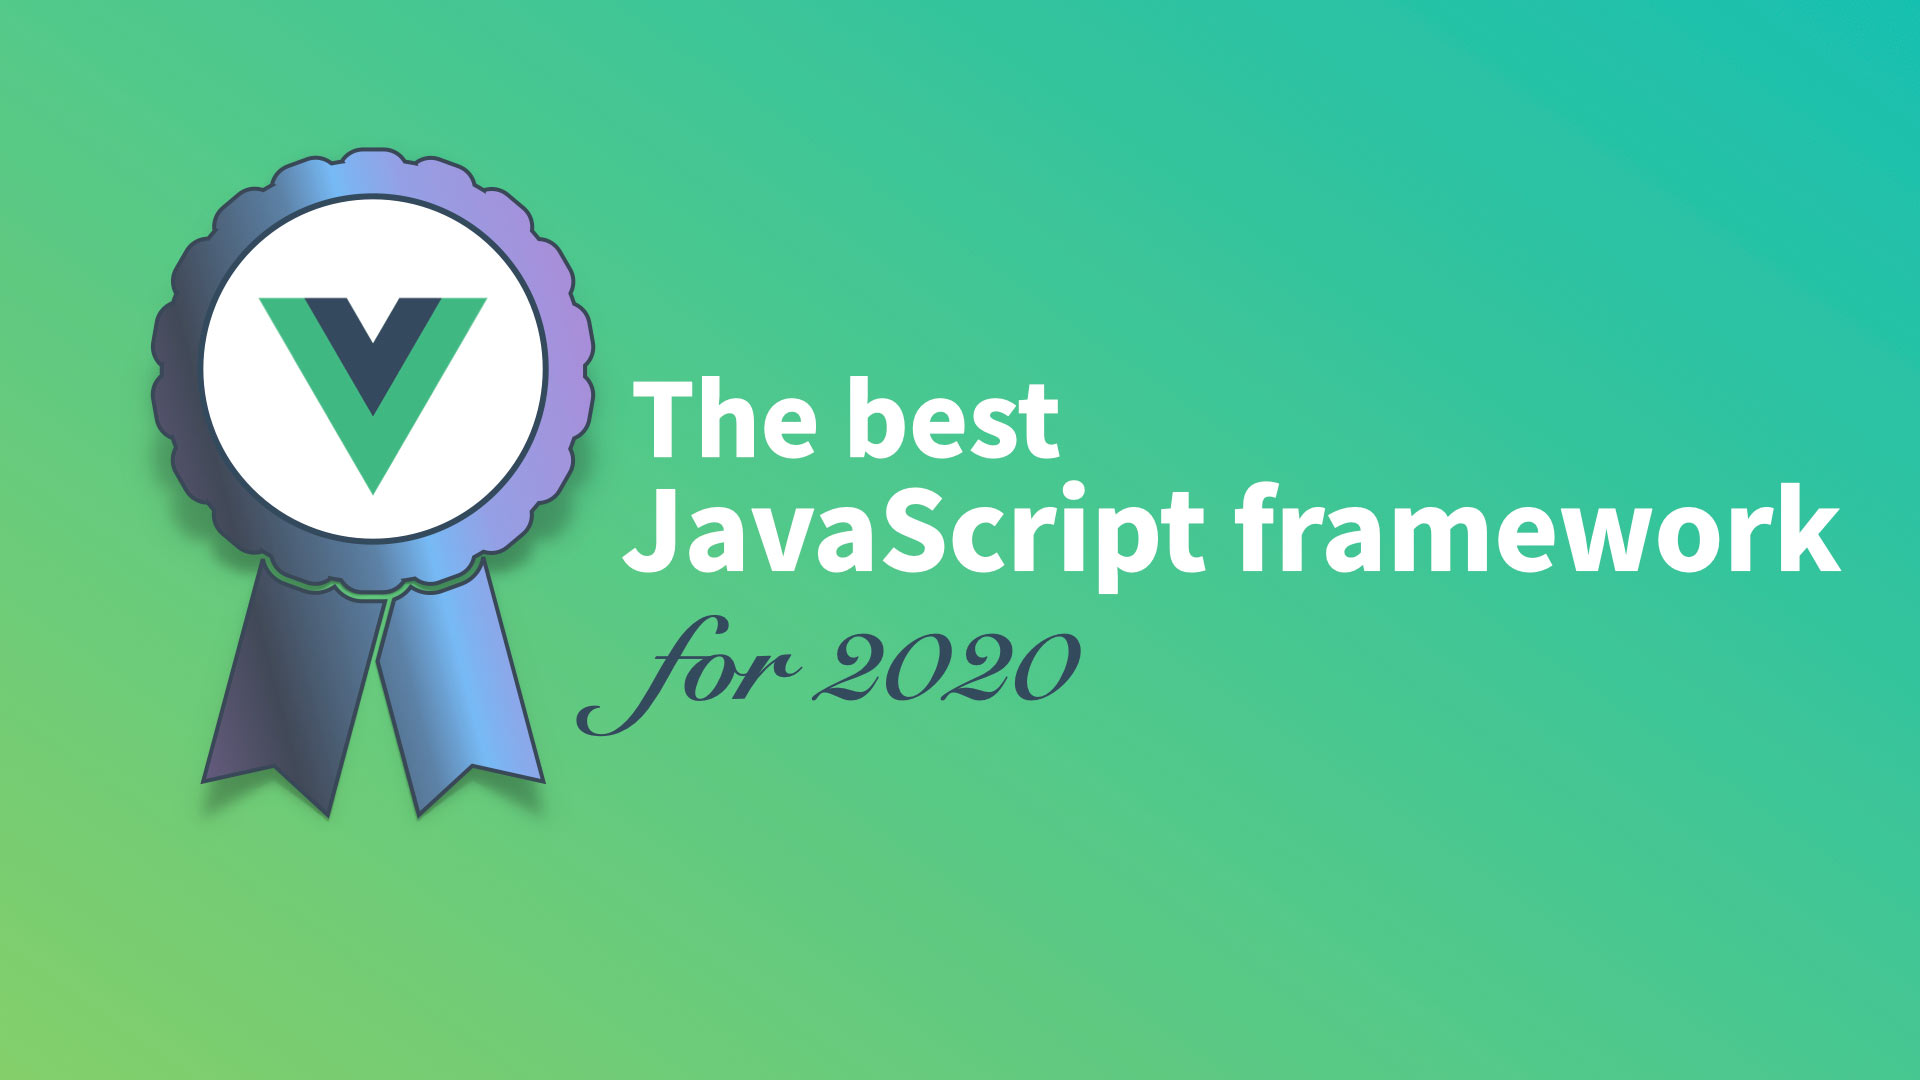 Why Vue is the best framework for 2020